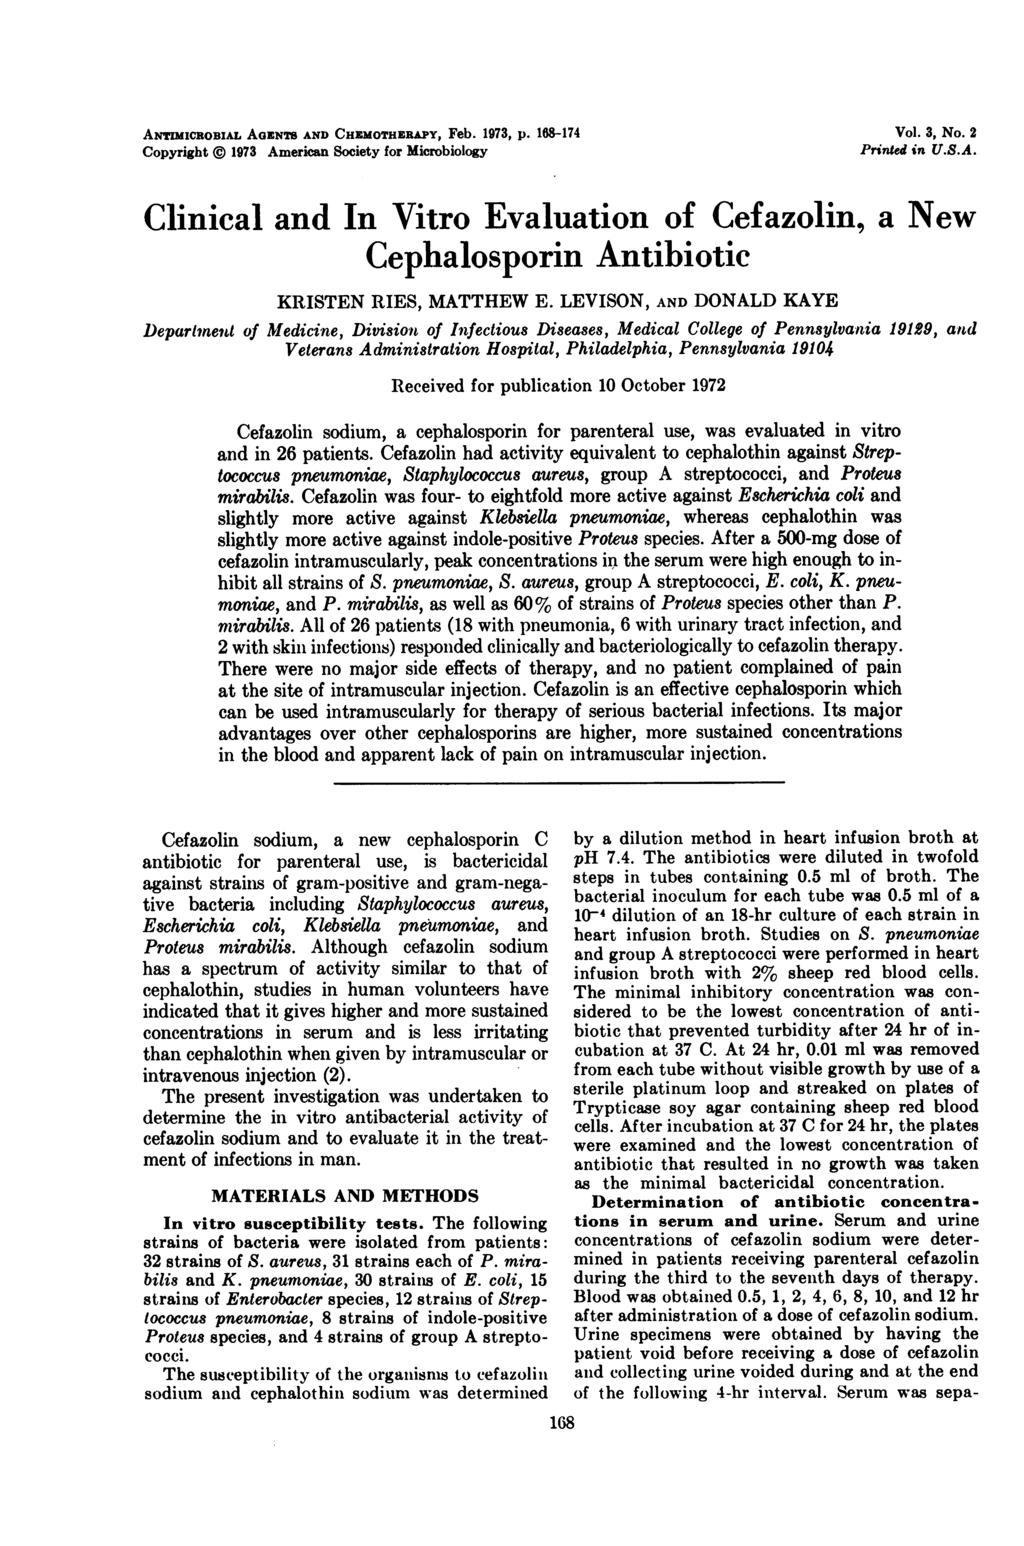 ANTMICROBIAL AGZNTS AND CHEMOTHERPY, Feb. 1973, p. 168174 Copyright 1973 American Society for Microbiology Vol. 3, No. 2 Printed in U.S.A. Clinical and In Vitro Evaluation of Cefazolin, a New Cephalosporin Antibiotic KRISTEN RIES, MATTHEW E.